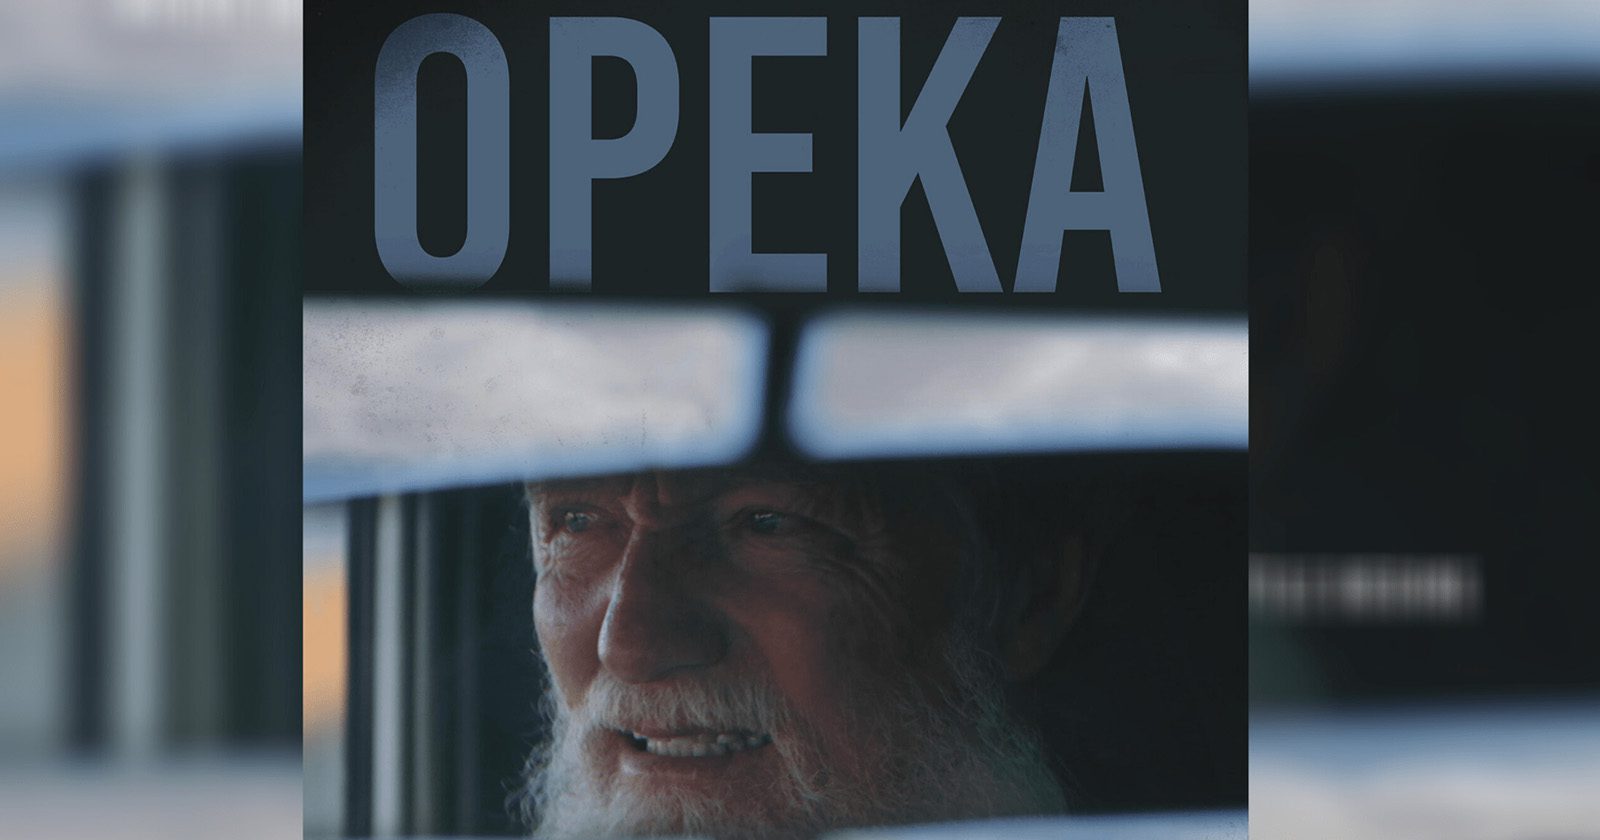 The documentary “Opeka” Wins the Golden Palm at the Beverly Hills Film Festival